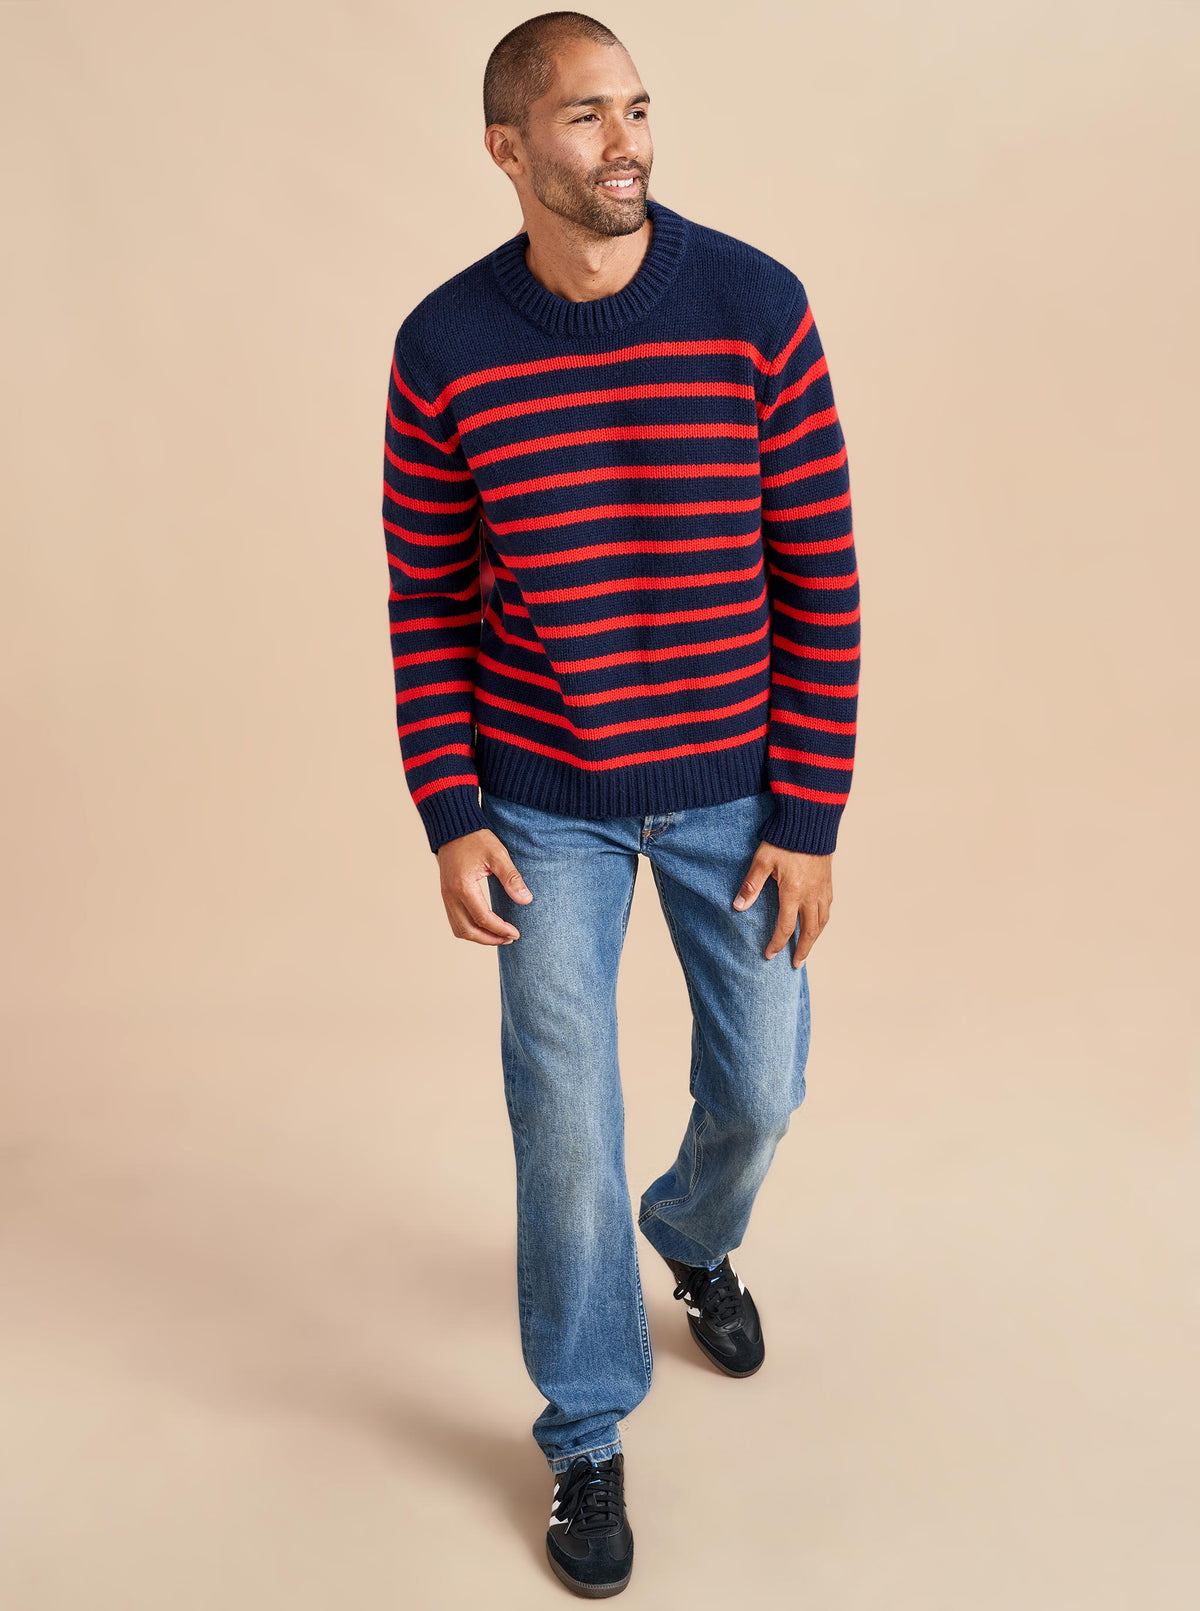 Our best-selling Marin Sweater just got a lot better. Get your loved one on board with our men's version in navy with red stripes in our signature 7-ply wool-cashmere blend. Give him the gift that keeps on giving. 